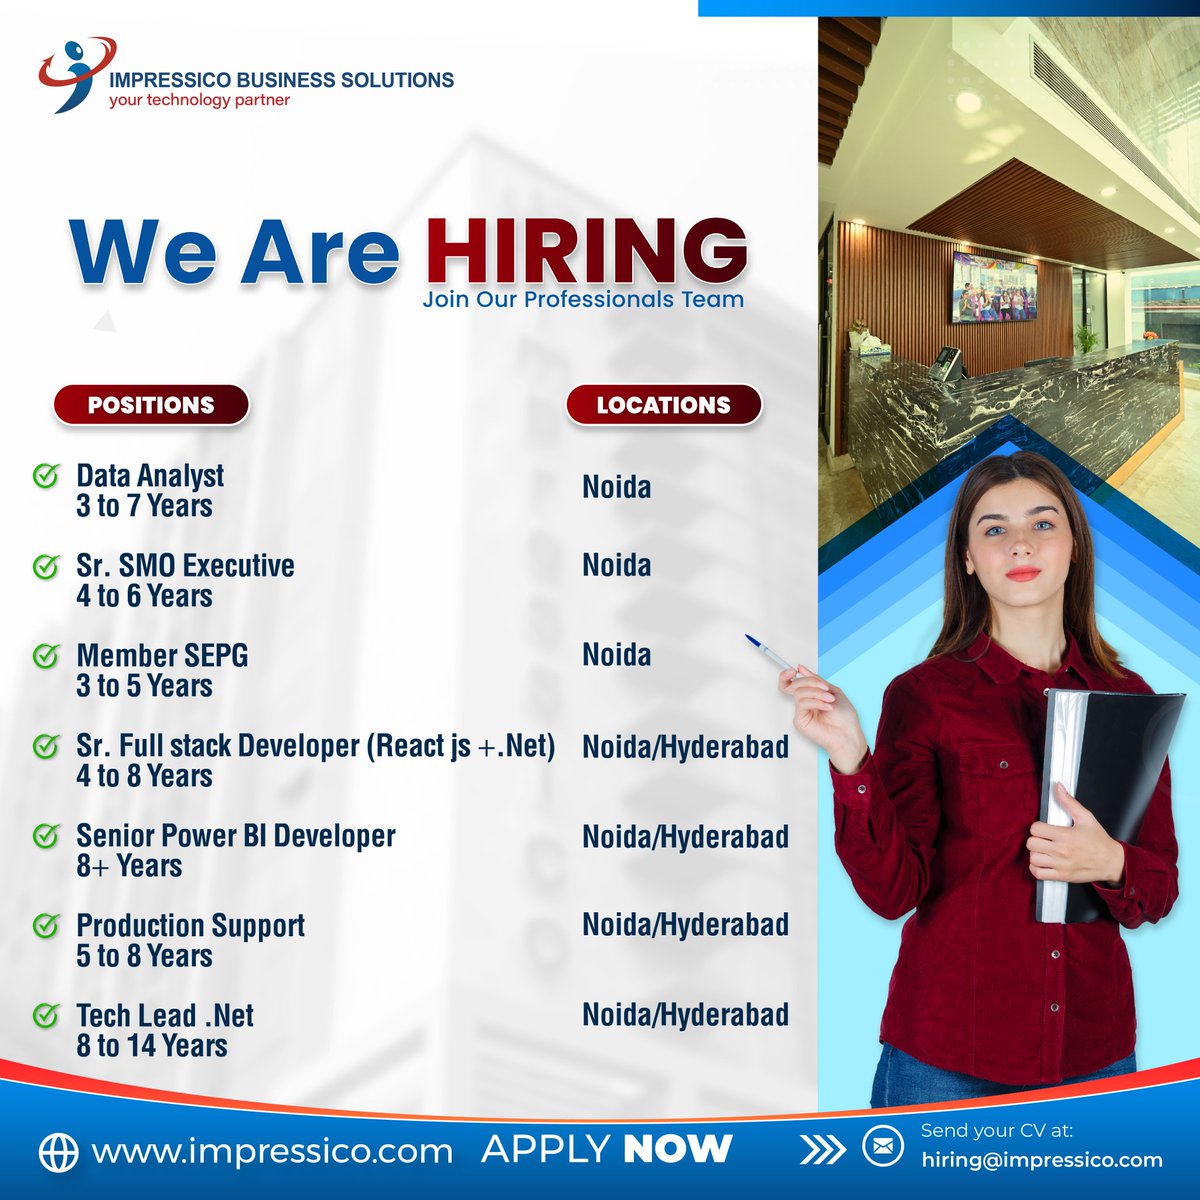 Great opportunity! We are hiring experienced professionals for various positions, as mentioned. Visit the website for a detailed job description: impressico.com Interested candidates can share CV at hiring@impressico.com. #jobs #jobvacancy #impressico #HiringAlert